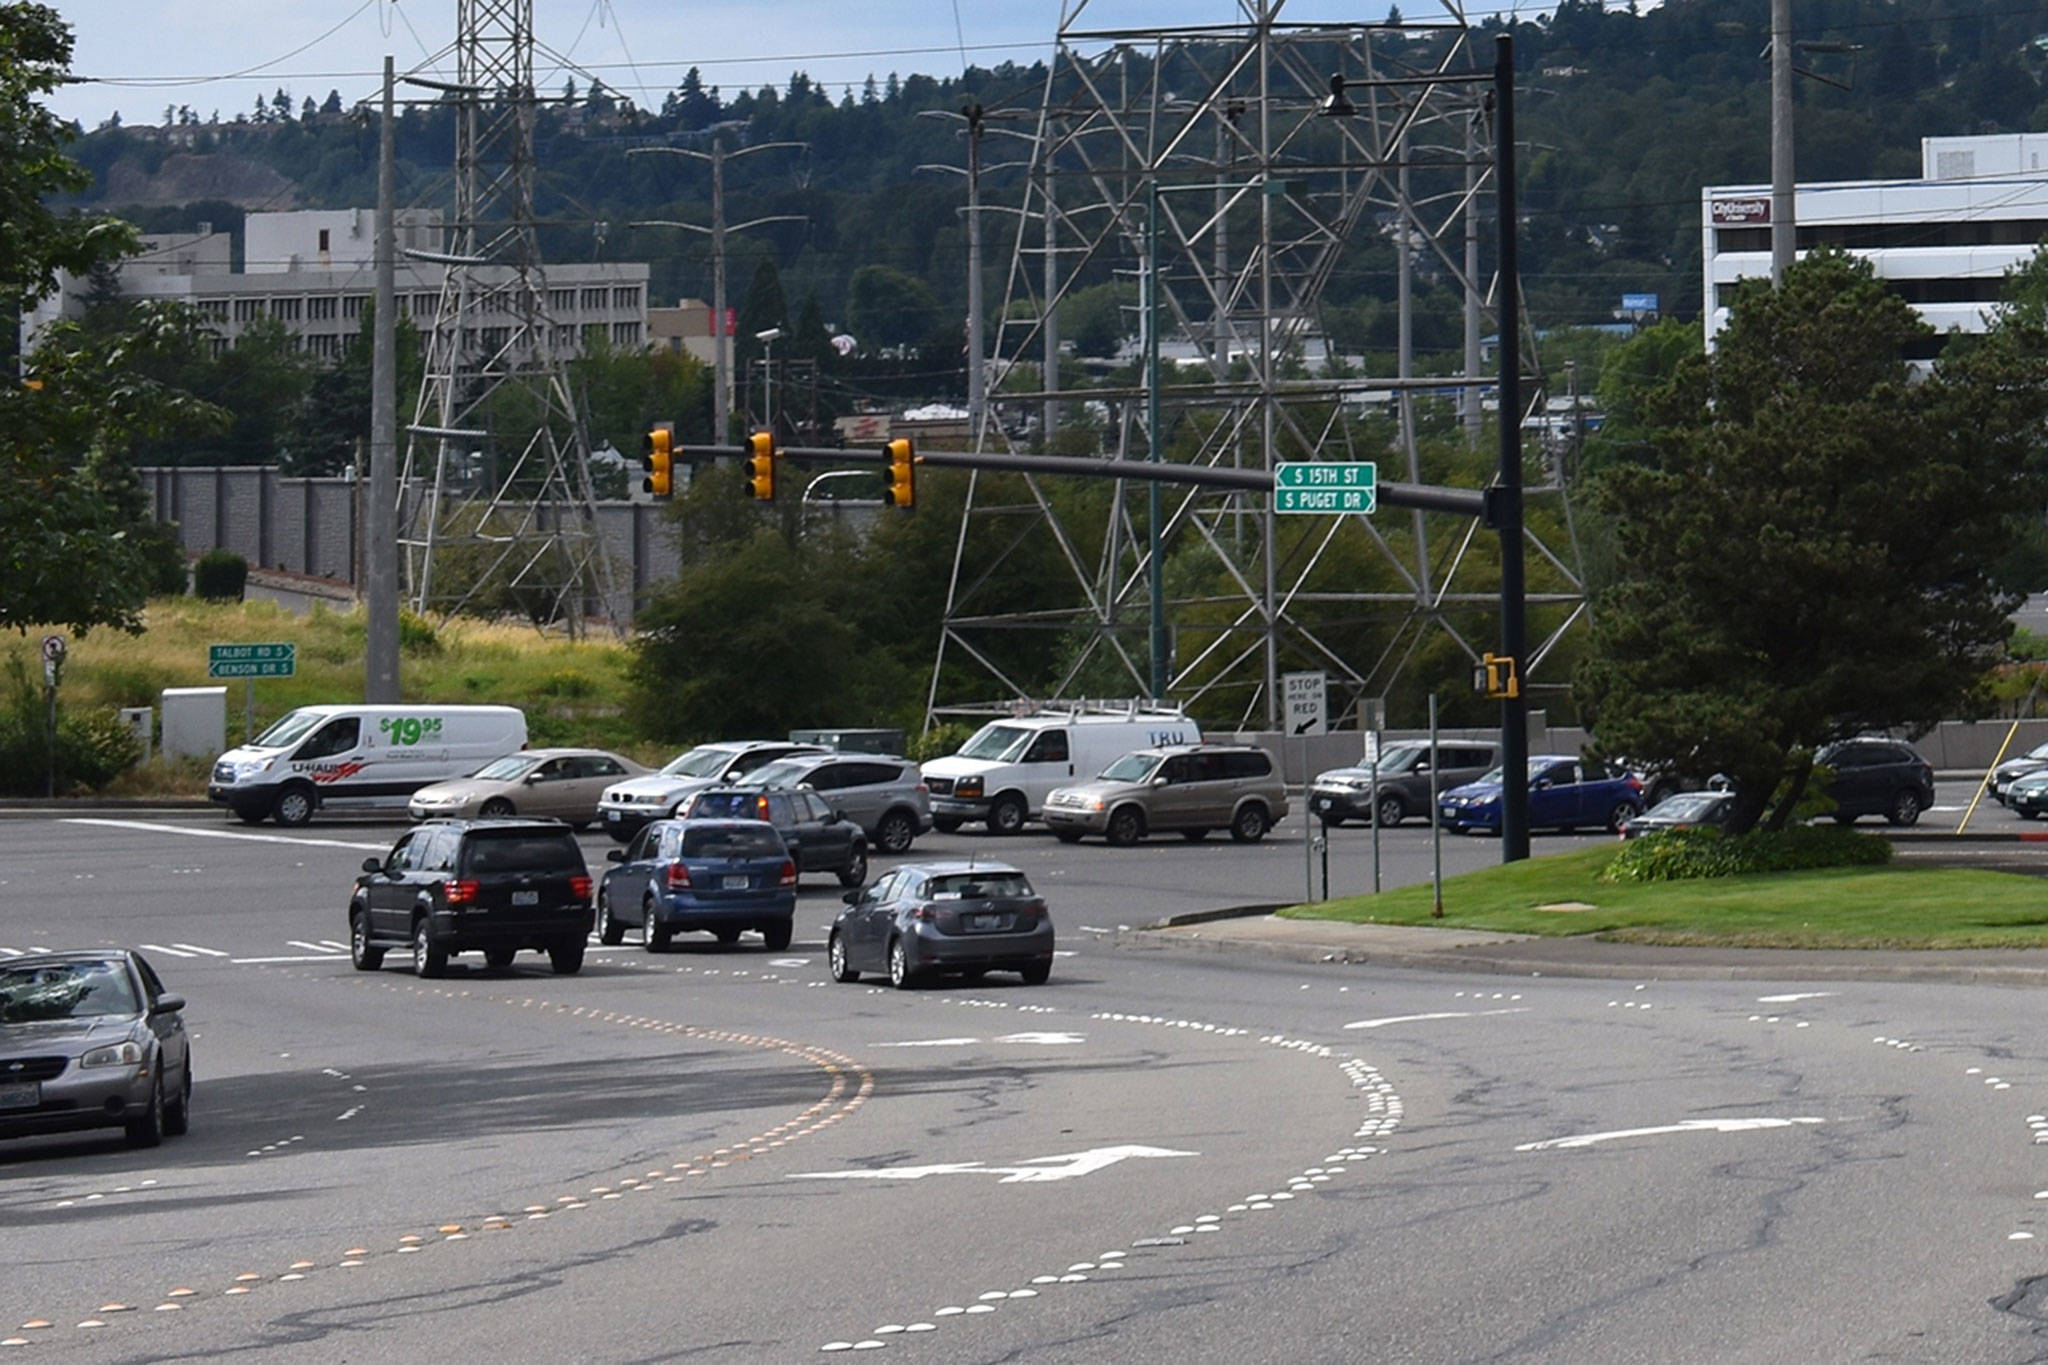 Photo by Haley Ausbun. The new red light camera at the Benson Drive and South Puget Drive intersection had the highest citations in the region, in 2018.